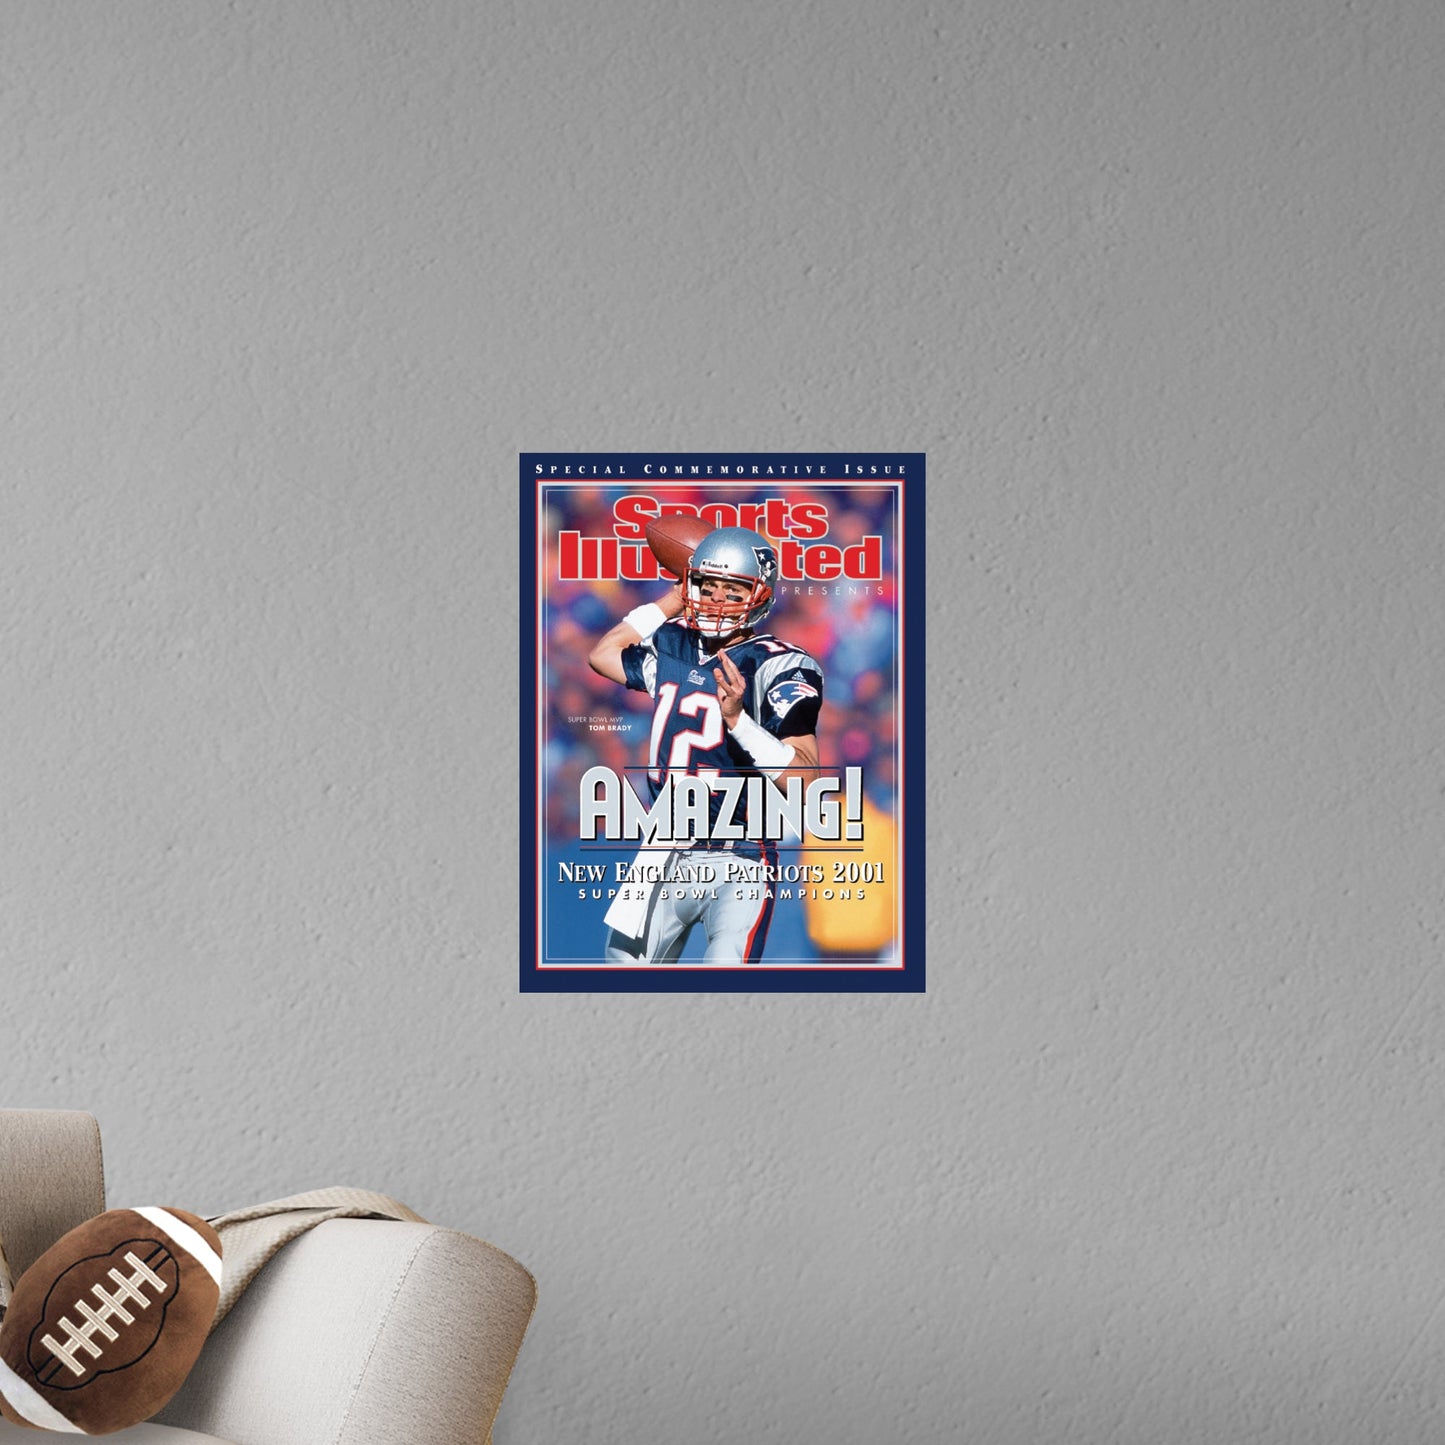 New England Patriots: Tom Brady Frebruary 2002 Sports Illustrated Cover - Officially Licensed NFL Removable Adhesive Decal